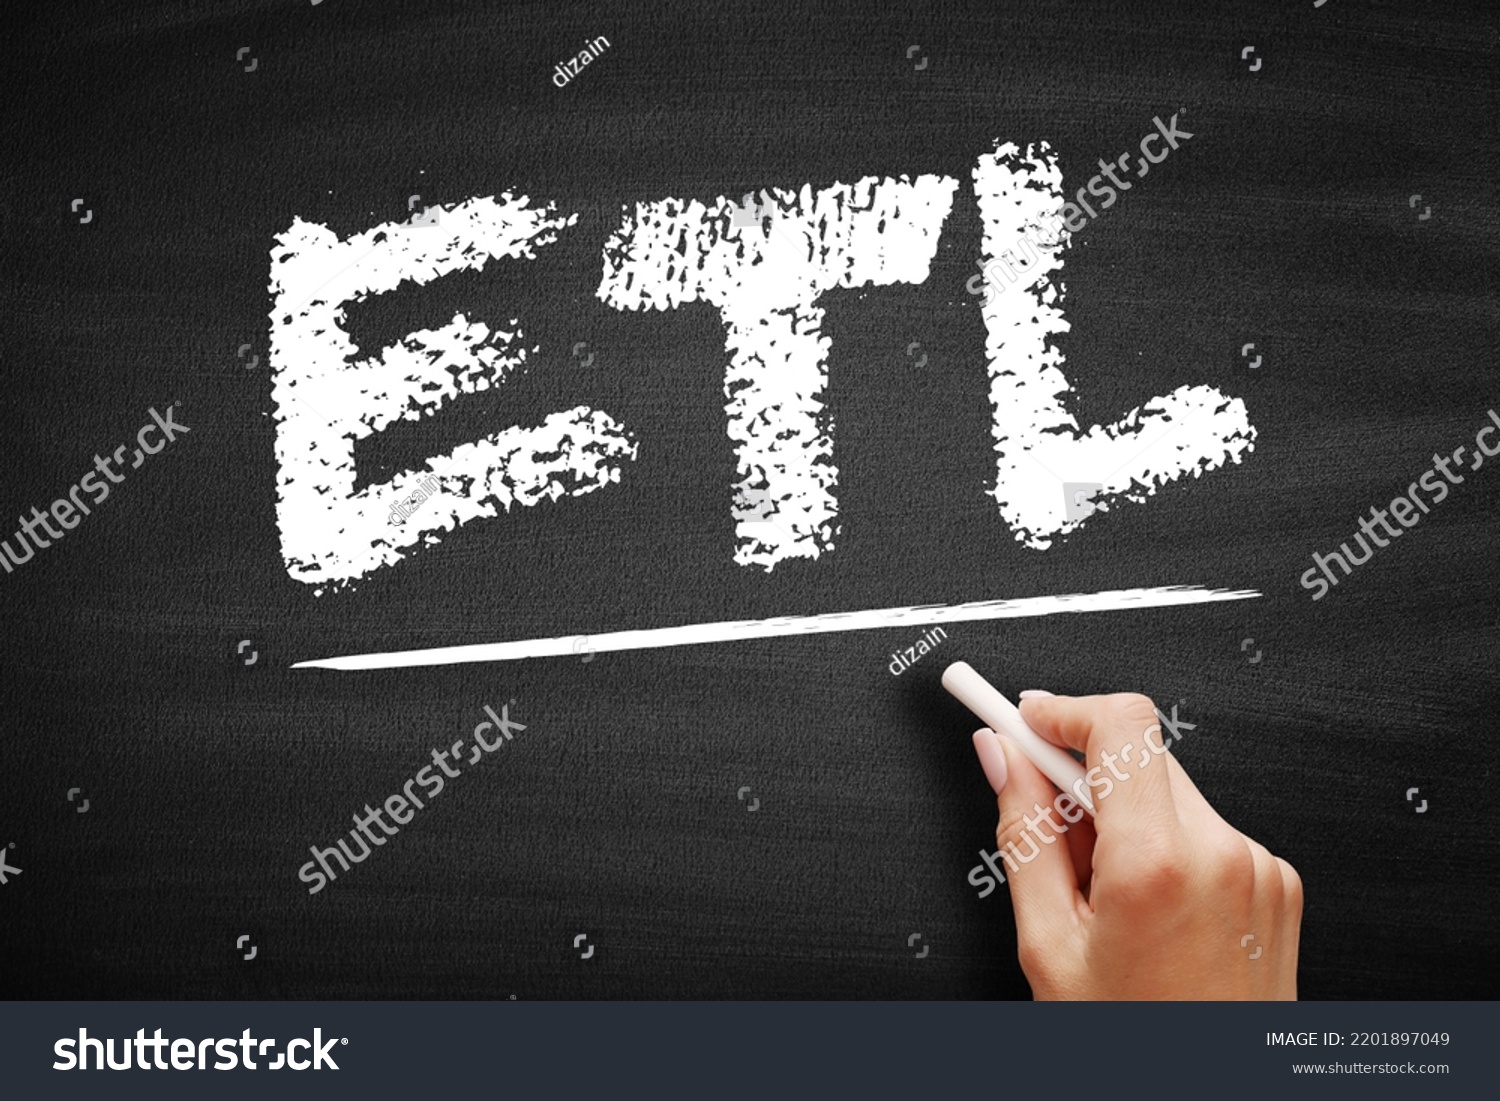 ETL - Extract Transform Load is a three-phase process where data is extracted, transformed and loaded into an output data container, acronym technology concept on blackboard #2201897049